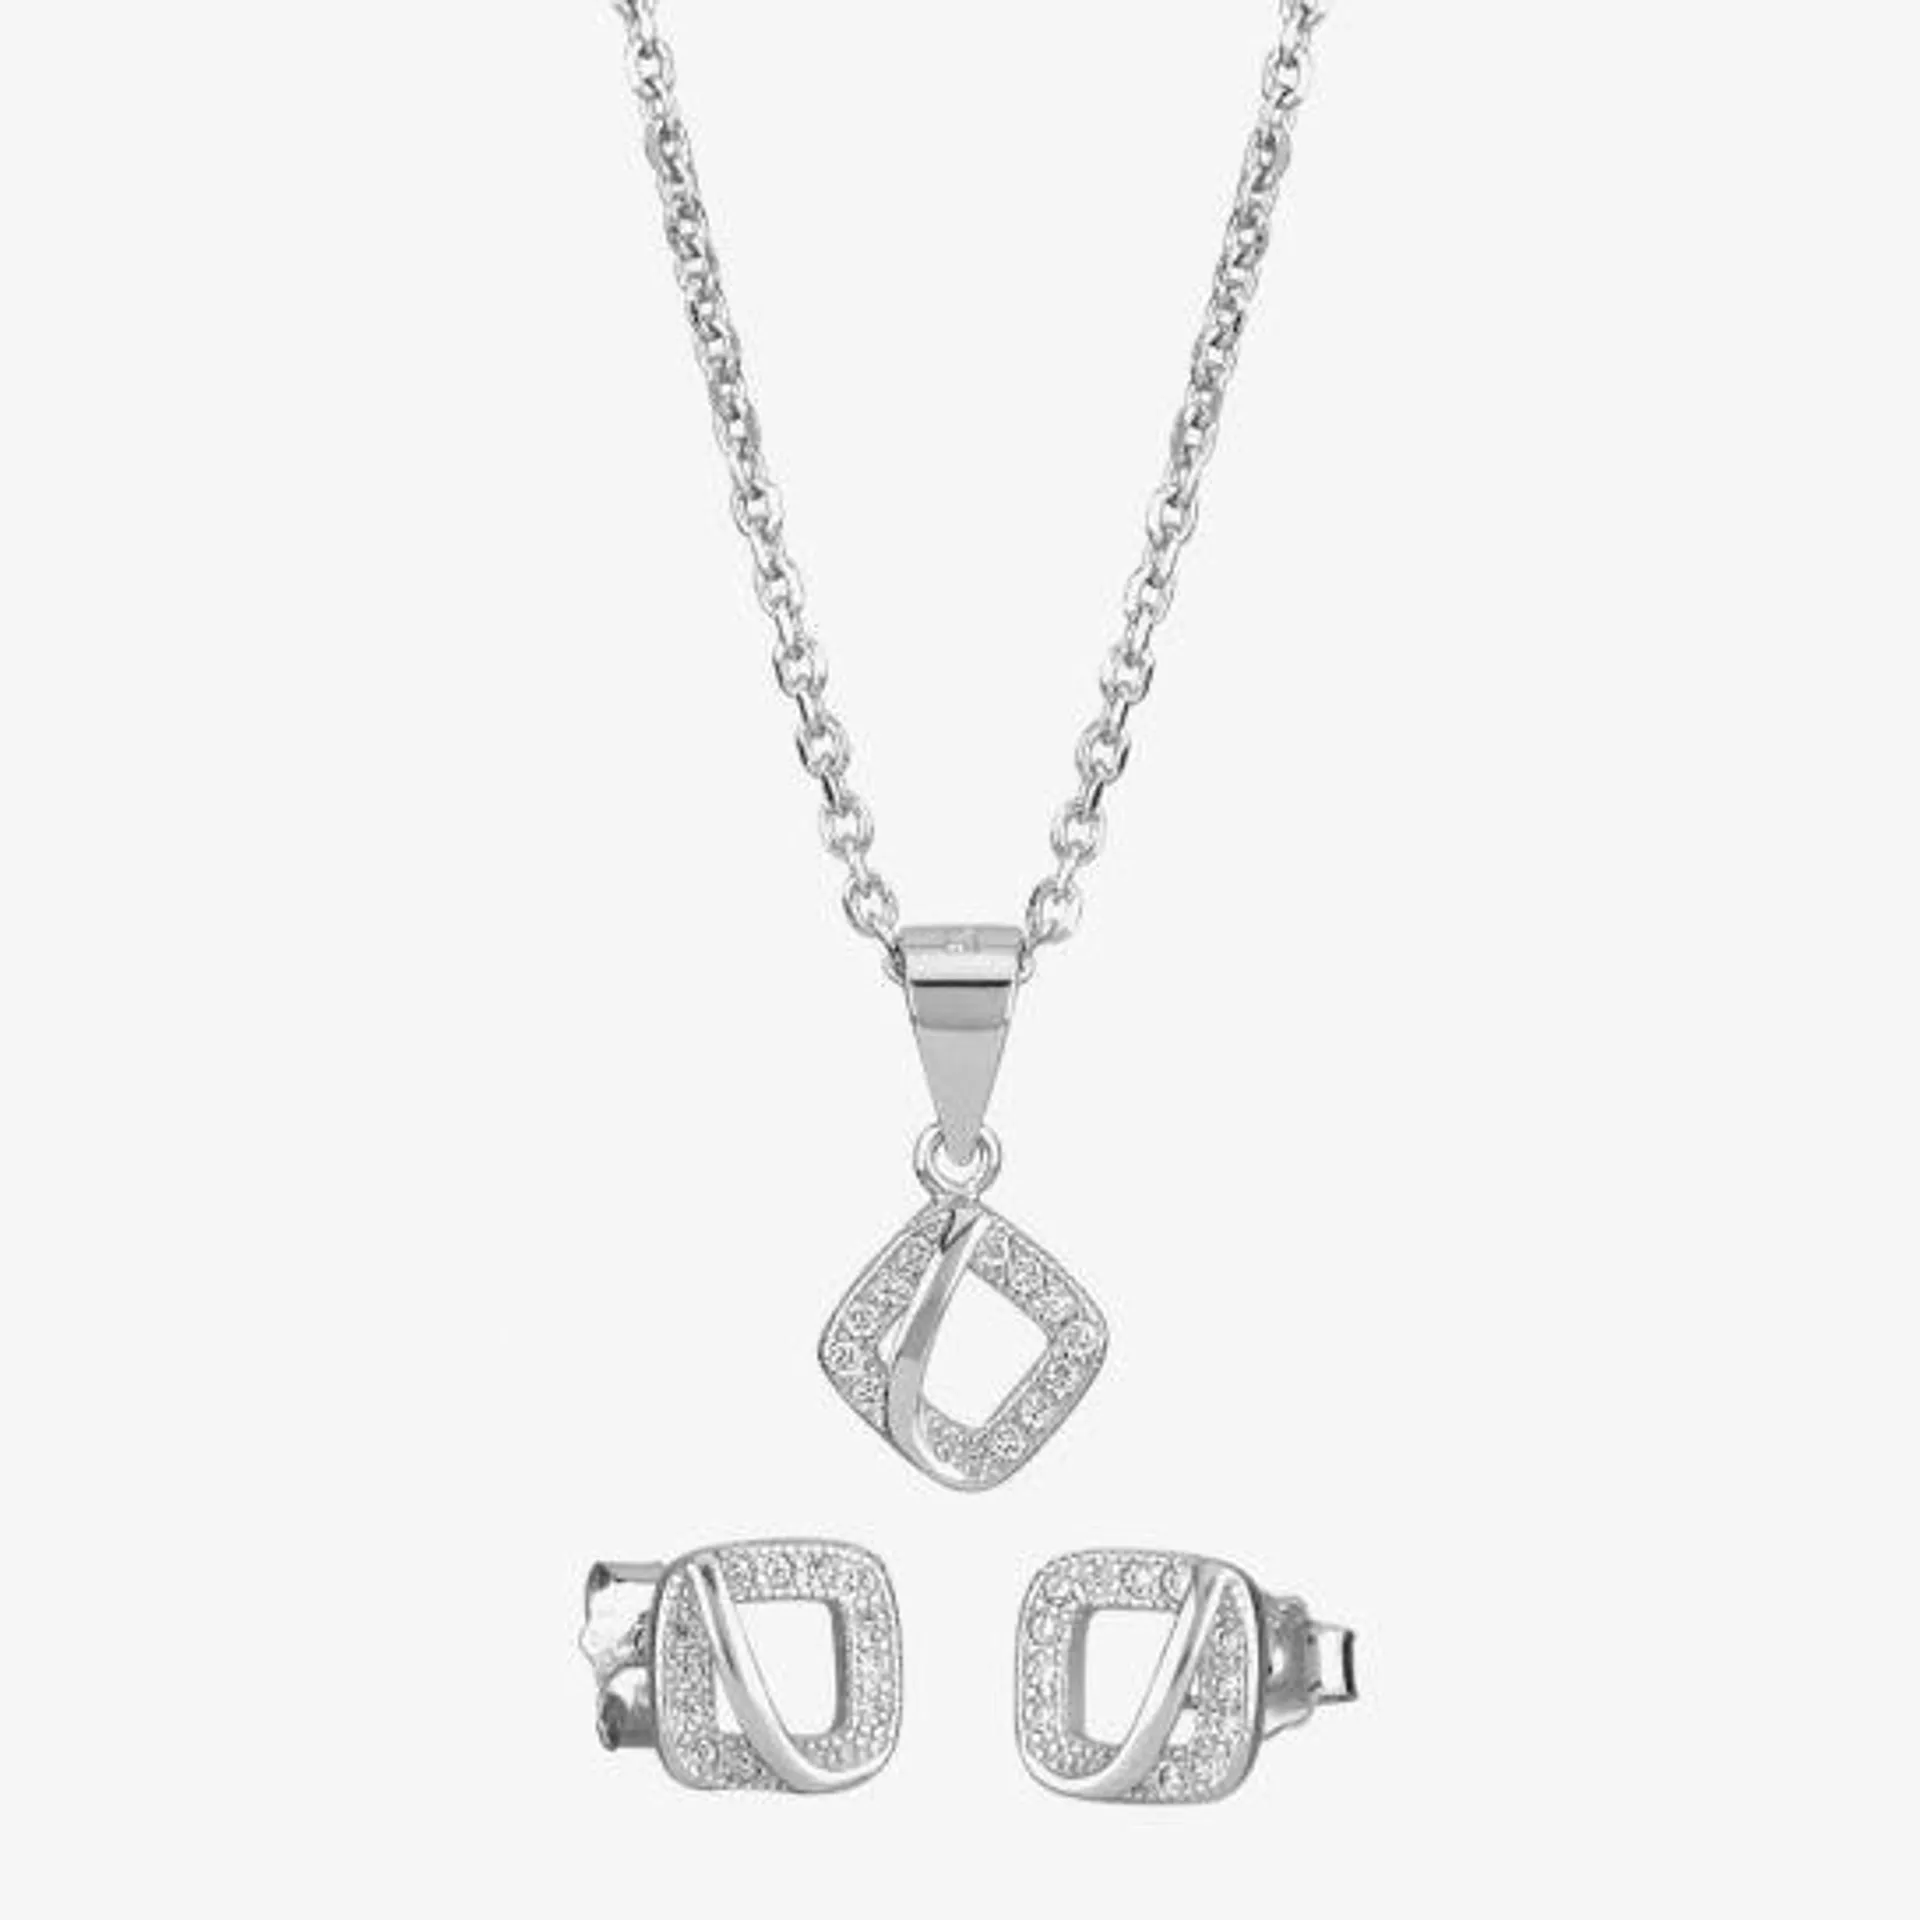 Silver Cubic Zirconia Open Square Pendant and Earring Set